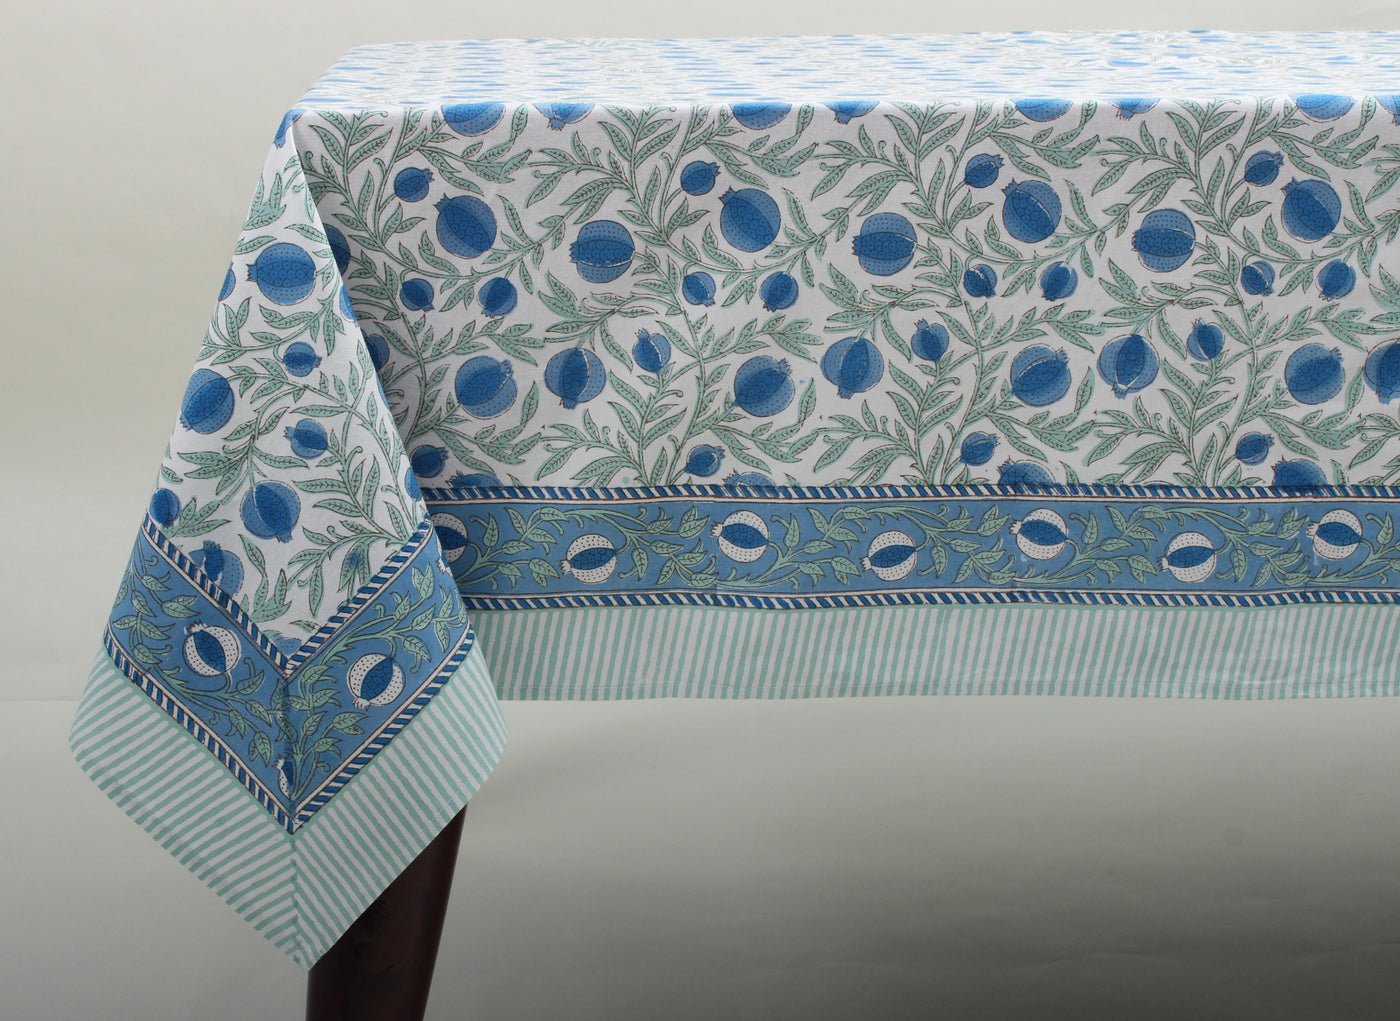 Fabricrush Tablecloth, Queen Blue, Celadon Green Indian Floral Hand Block Printed Table Cover, French Tablecloth, Pomegranate Print Dinning Tablecloth